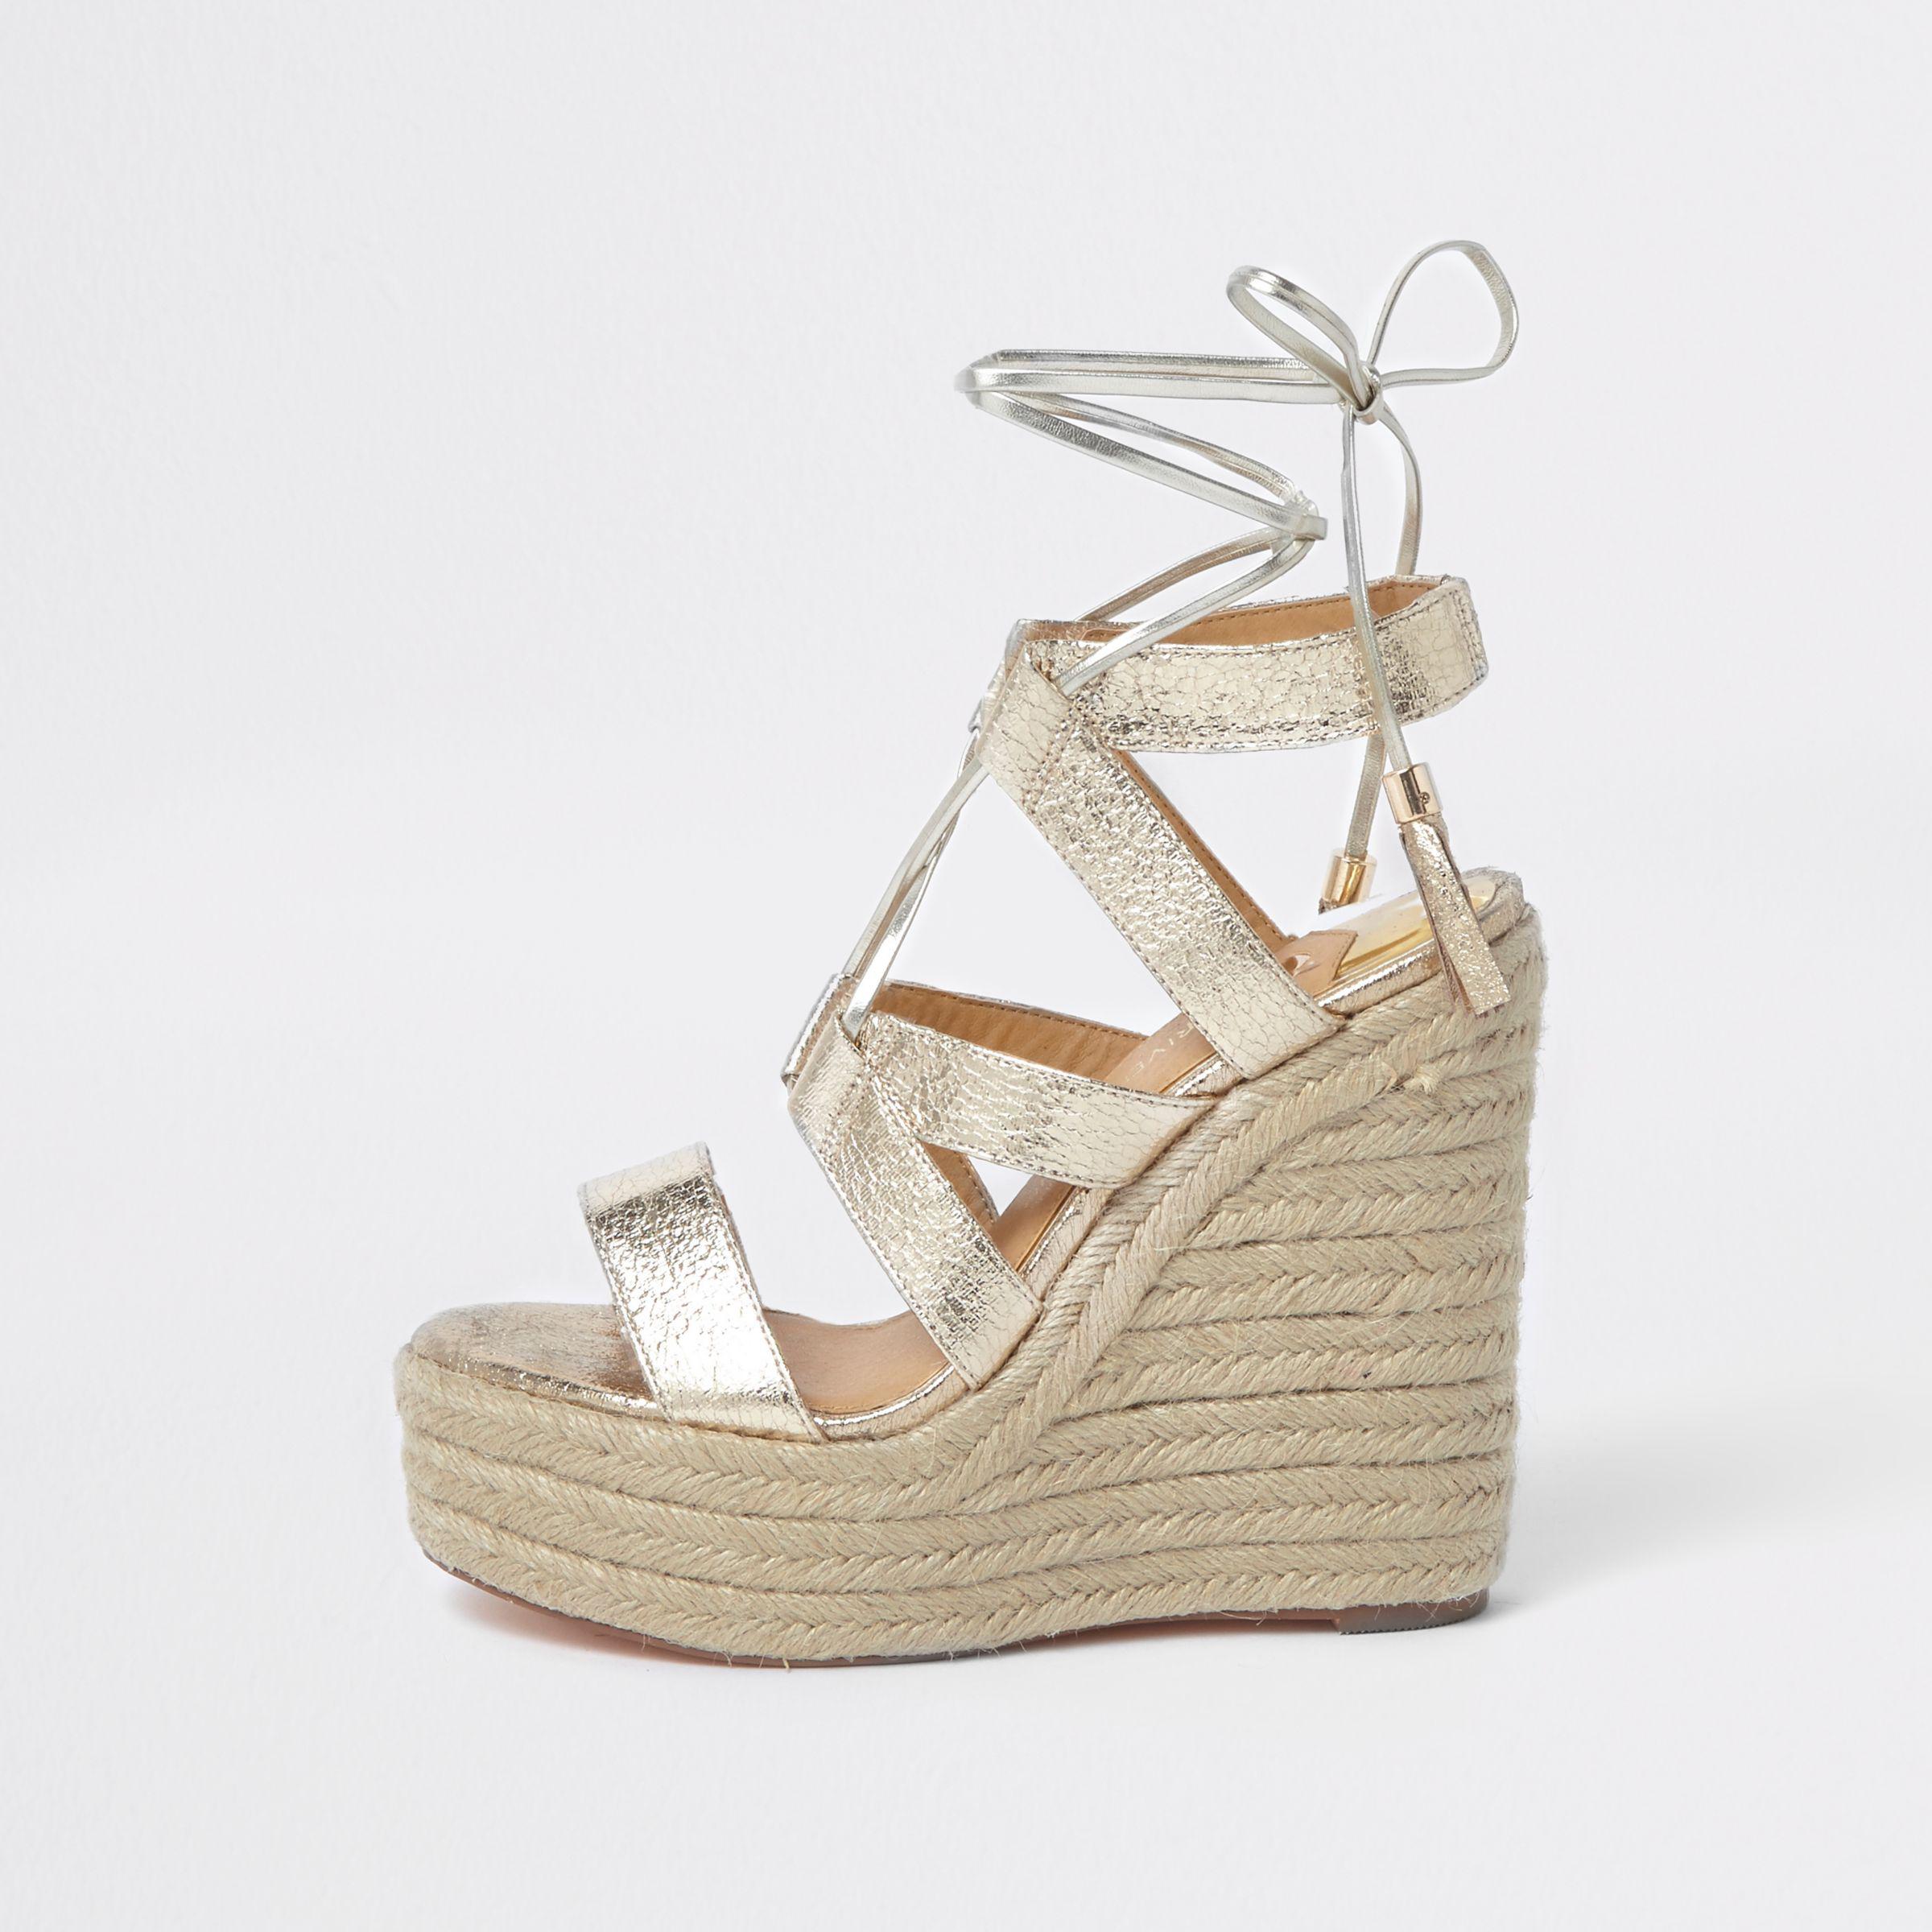 River Island Gold Metallic Tie-up Espadrille Wedges in Yellow | Lyst